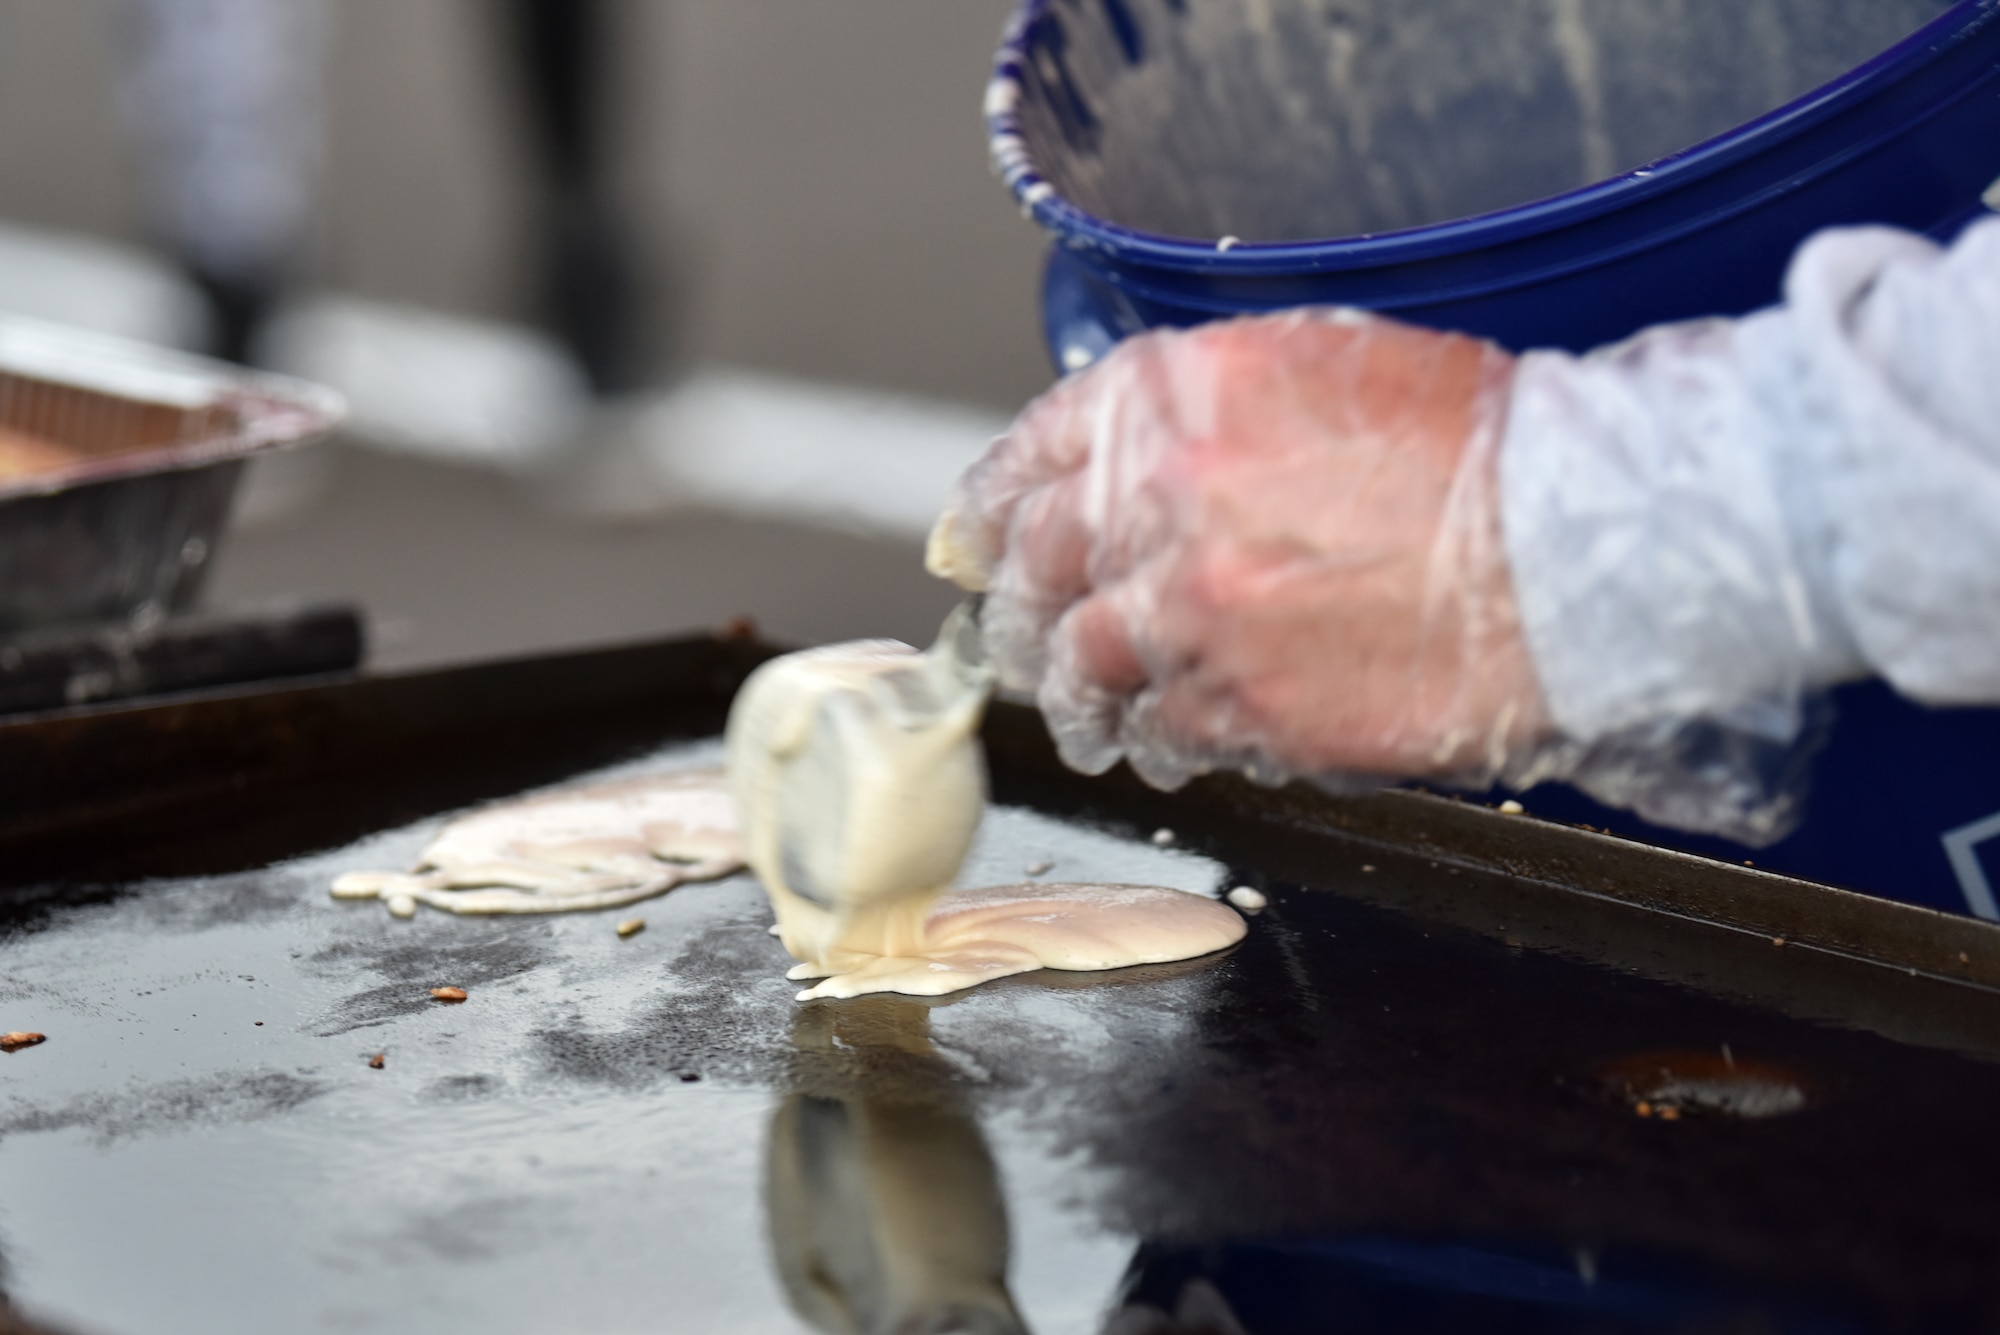 A volunteer pours pancake batter onto a griddle in preparation for the pancake breakfast served before and after the Air Force Birthday Celebration held on the Parade Field at Goodfellow Air Force Base, Texas, Sept. 18, 2020. Despite COVID-19 Goodfellow members were able to enjoy events throughout the week celebrating the Air Force’s birthday. (U.S. Air Force photo by Staff Sgt. Seraiah Wolf)